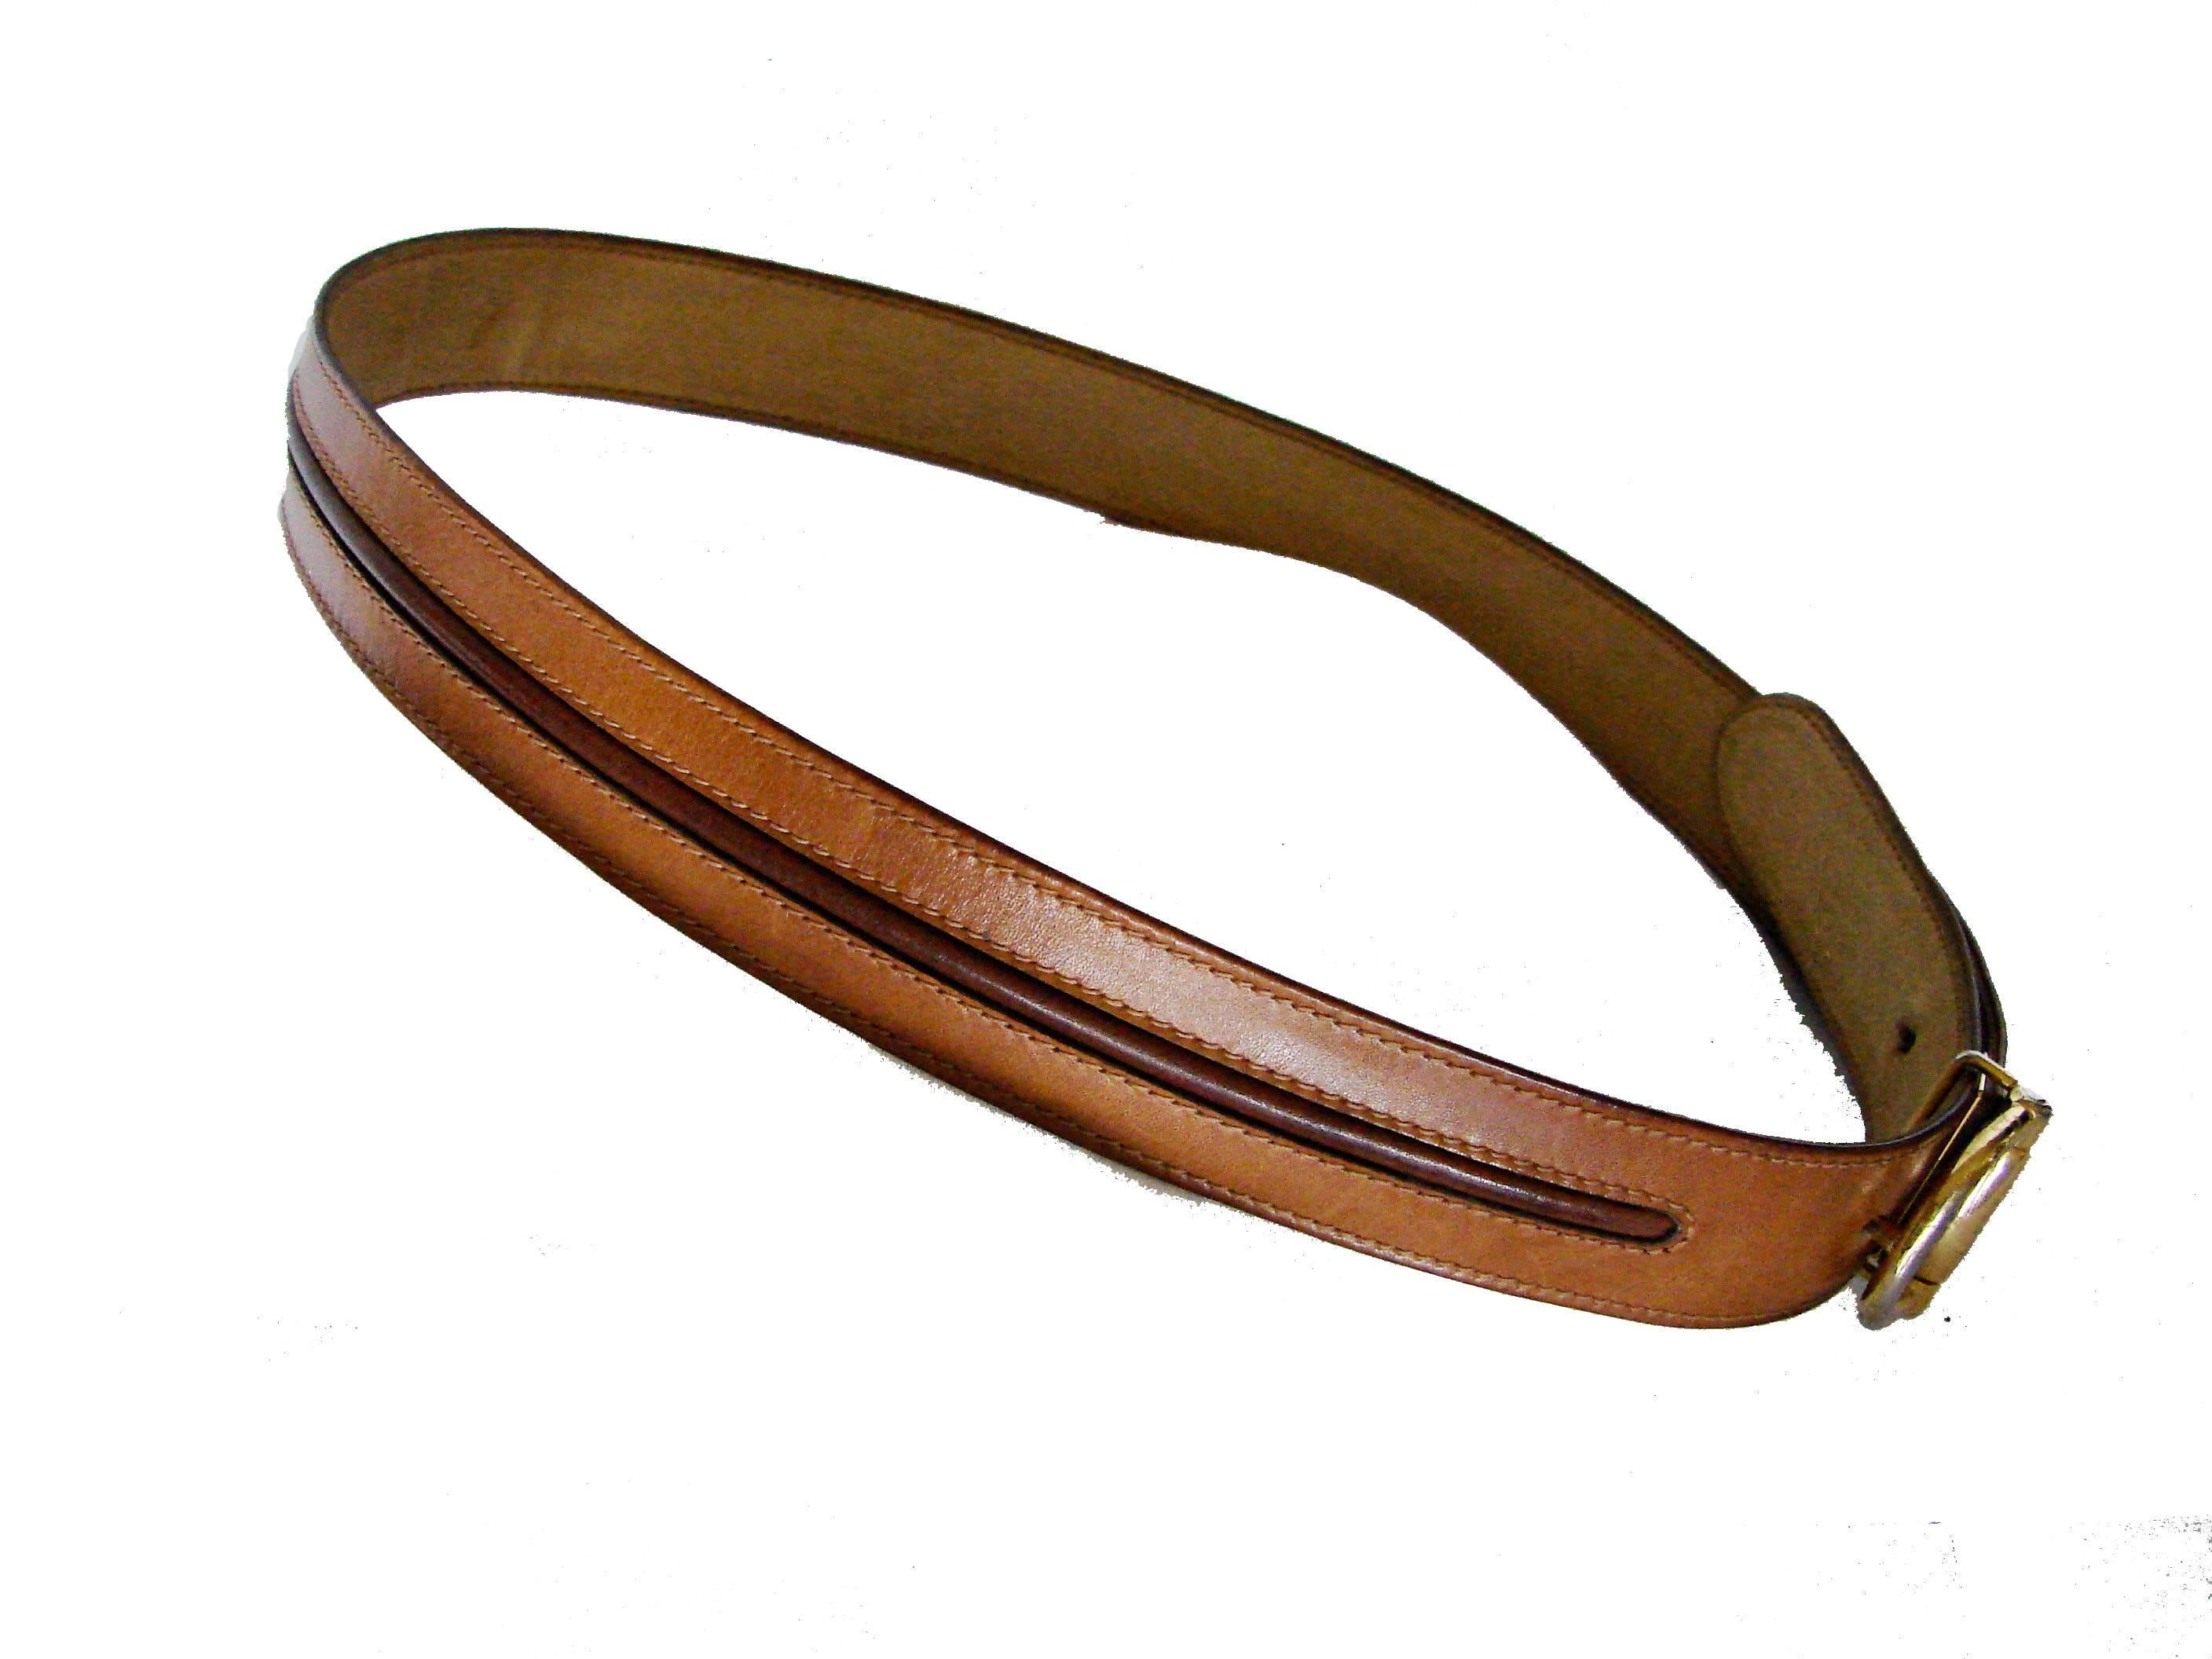 This horse bit buckle and belt was made by Gucci in the late 1970s.  Made from tan leather, the belt strap features a dark brown leather stripe at its center and the horse bit buckle is made from gold tone metal.  In good condition overall, the gold